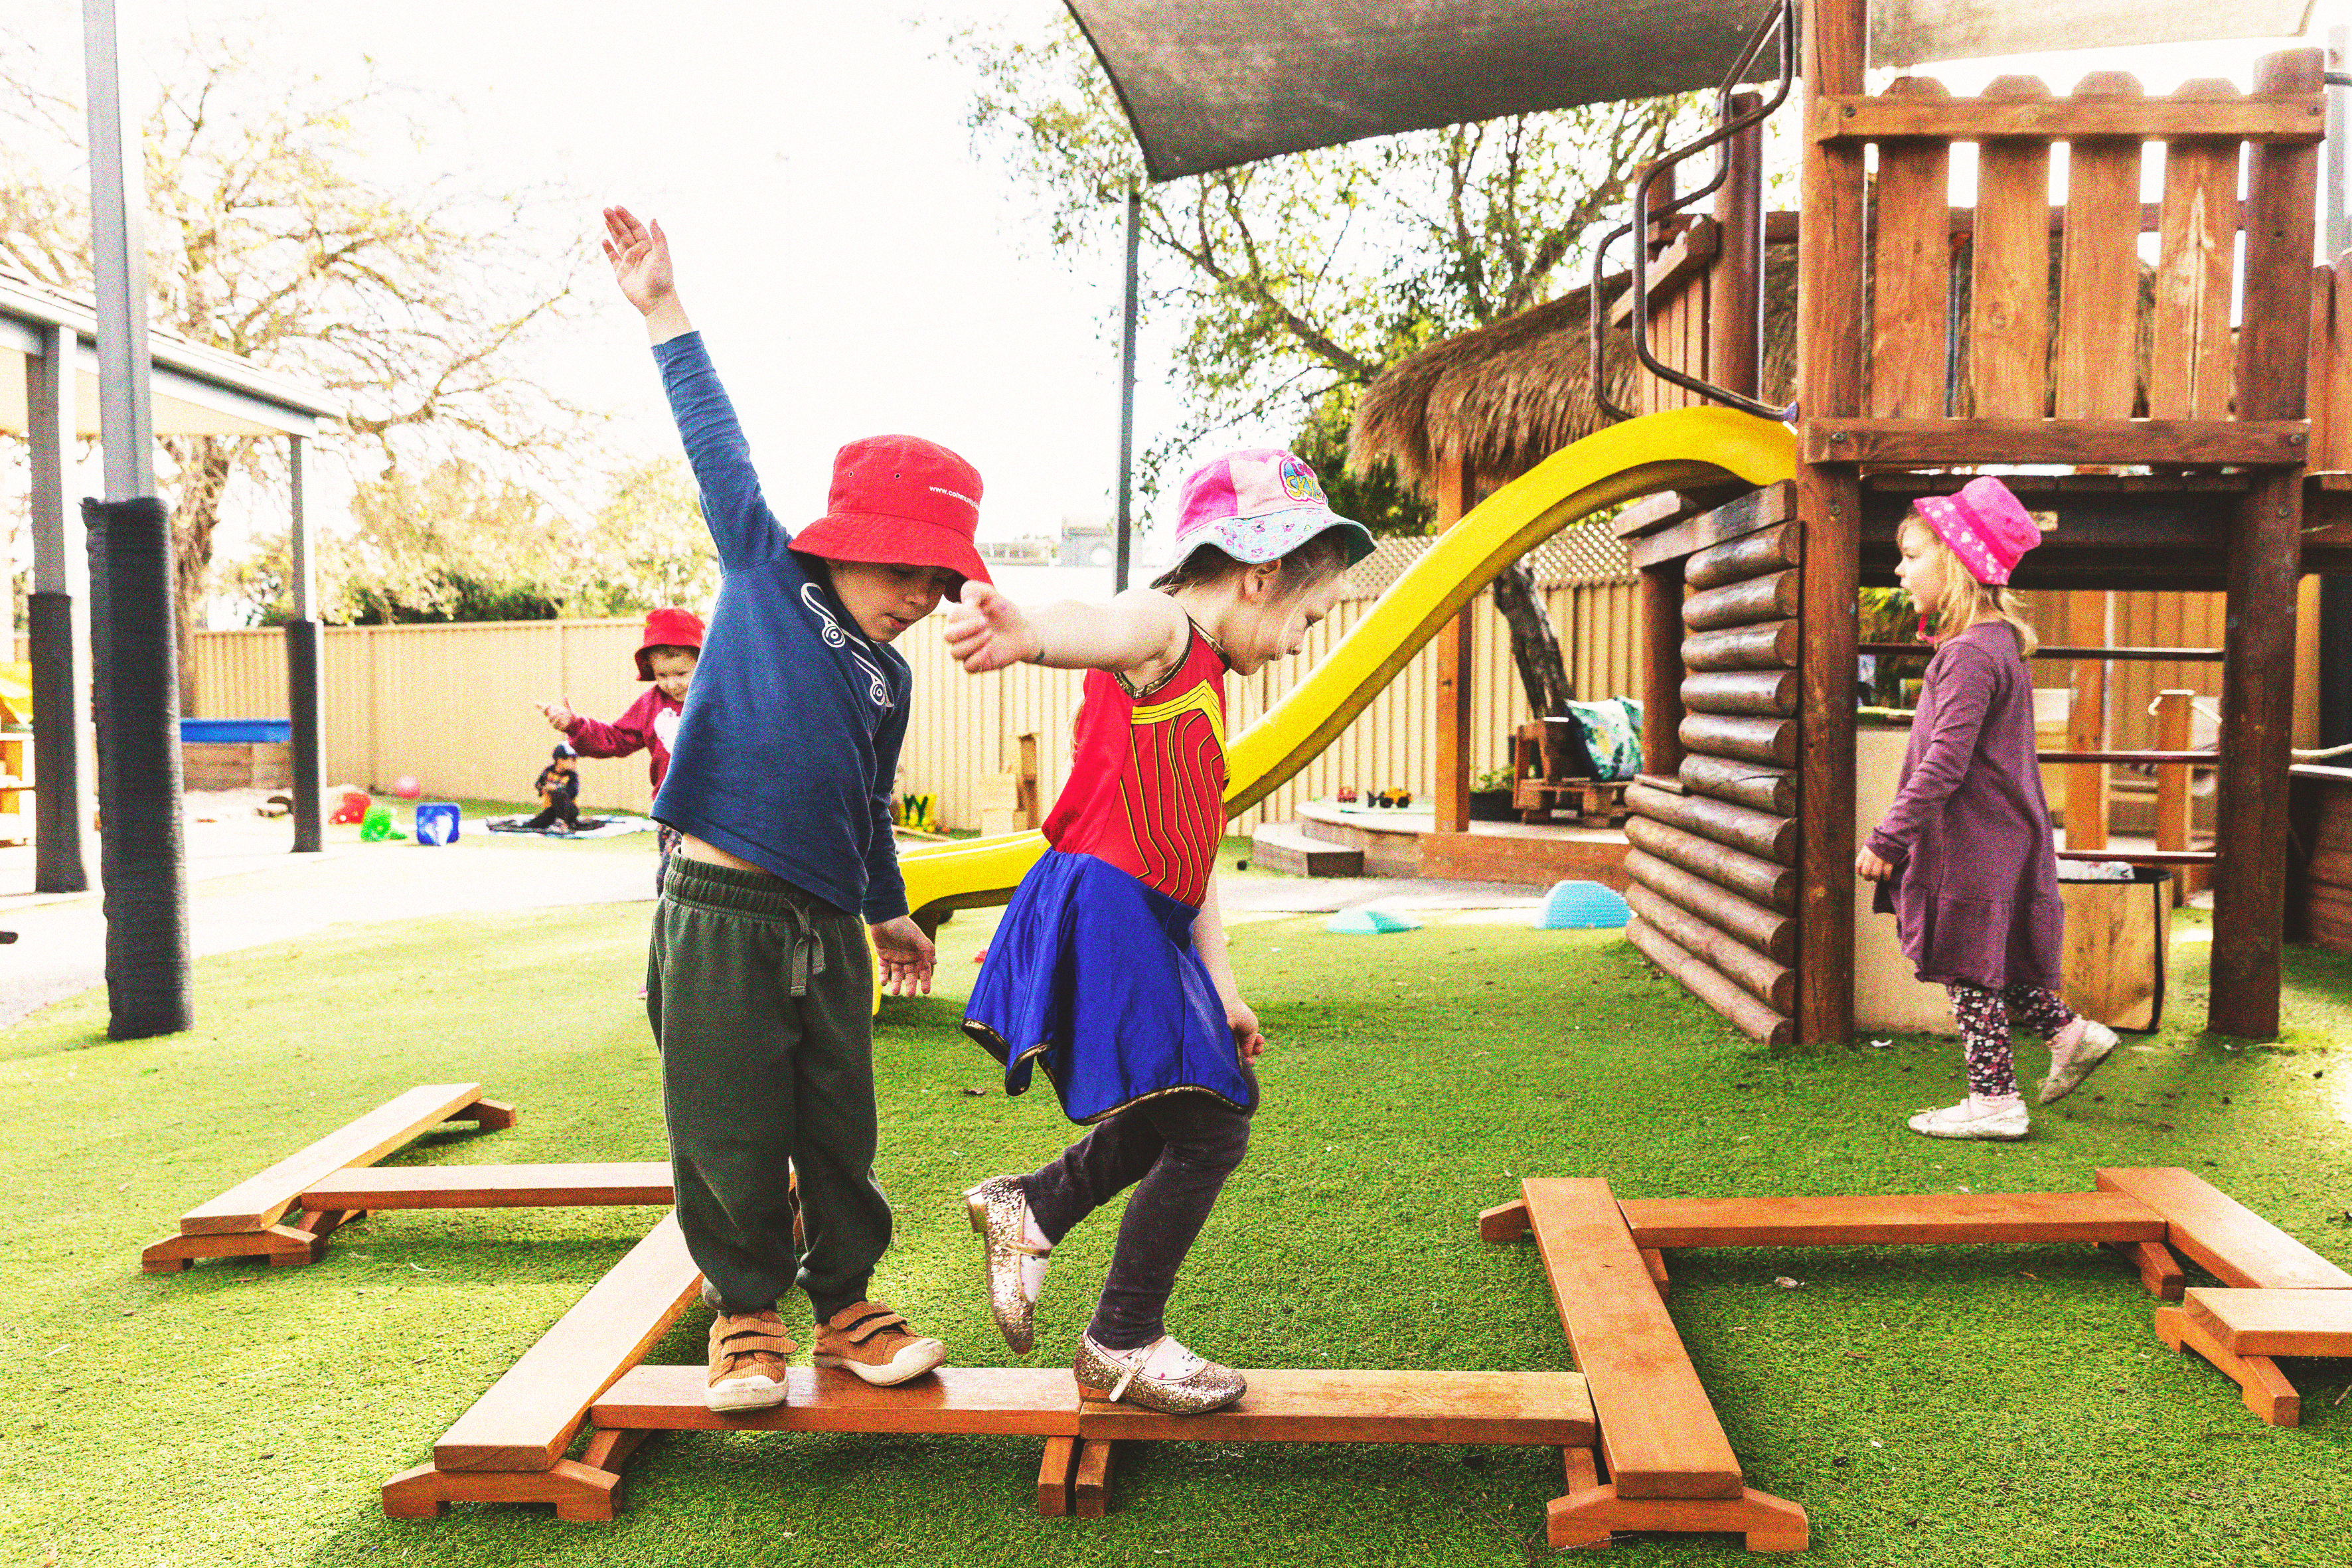 Some young children playing on balance beams